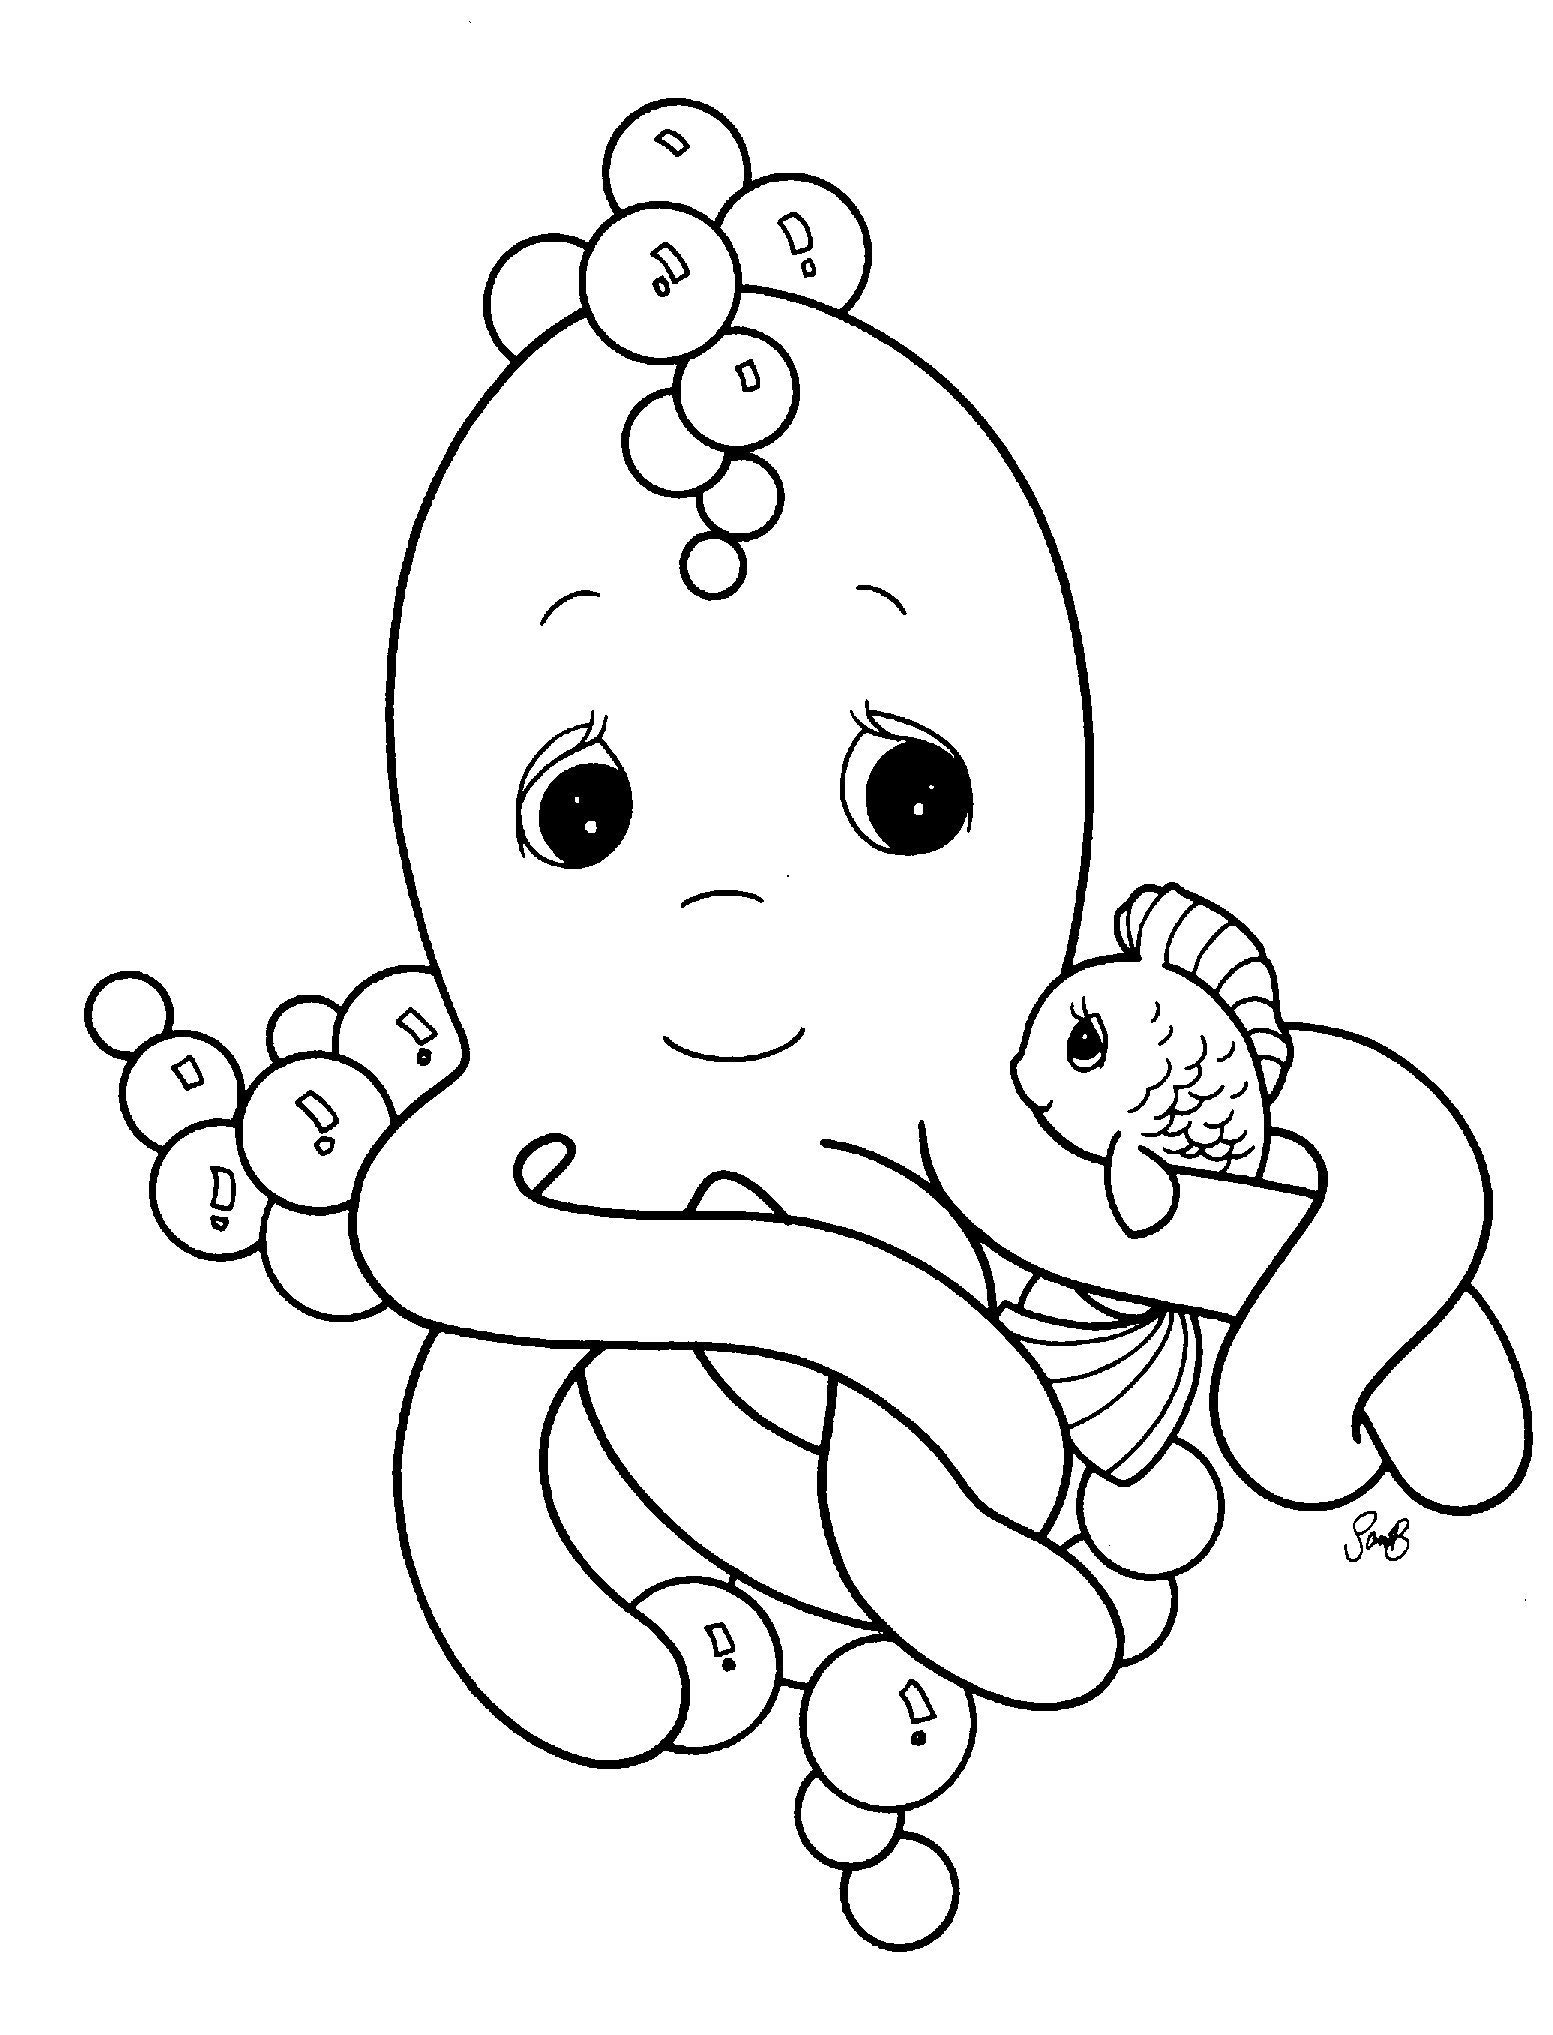 Precious Moments Animals Coloring Pages 24 with Precious Moments Animals Coloring Pages